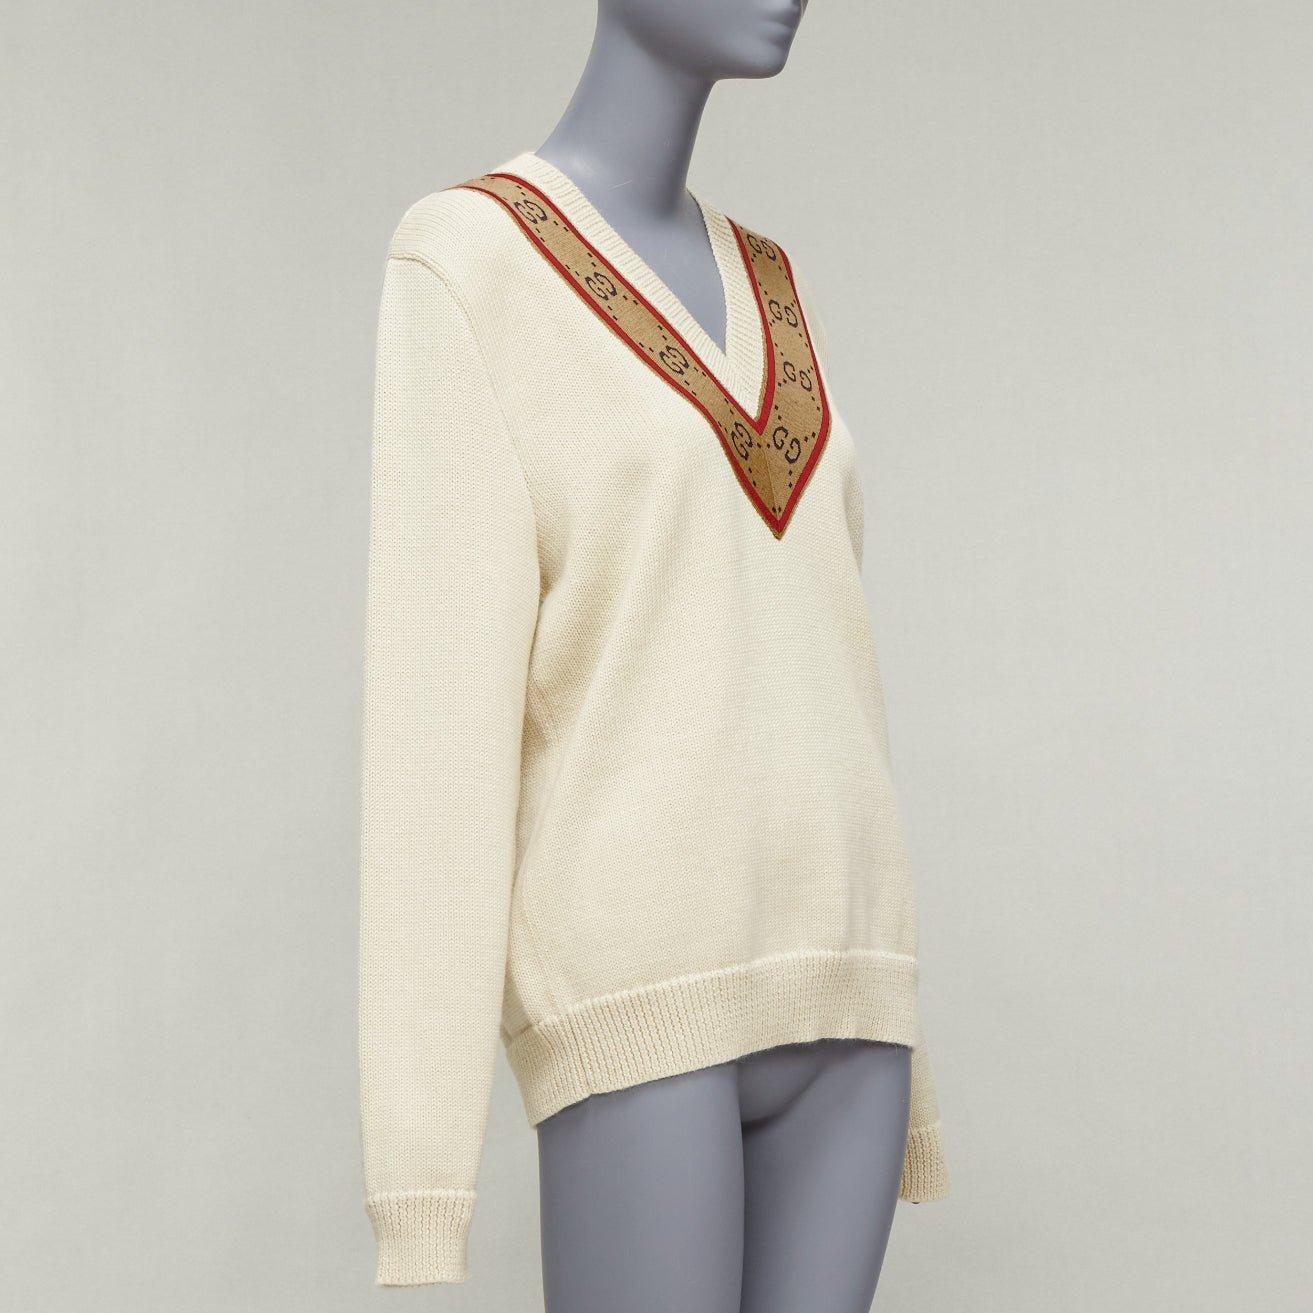 GUCCI 100% wool cream Vintage GG monogram V-neck varsity sweater S
Reference: AAWC/A00638
Brand: Gucci
Designer: Alessandro Michele
Material: Wool
Color: Cream, Brown
Pattern: Monogram
Closure: Slip On
Made in: Italy

CONDITION:
Condition: